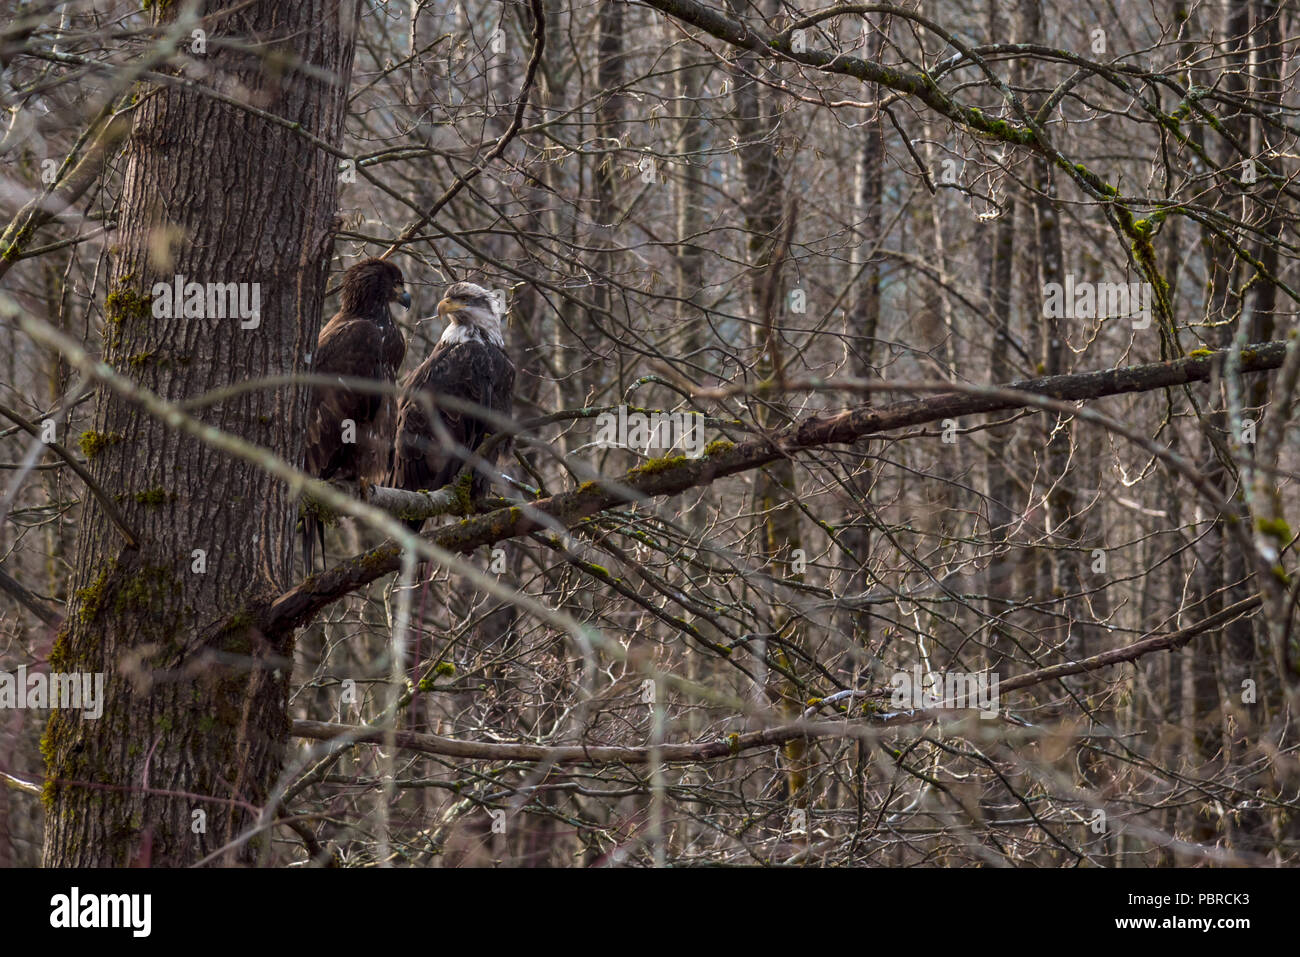 a moment of intimacy captured between a pair of beautiful bald eagles out on a limb of a tree within a forest of the canadian wilderness Stock Photo